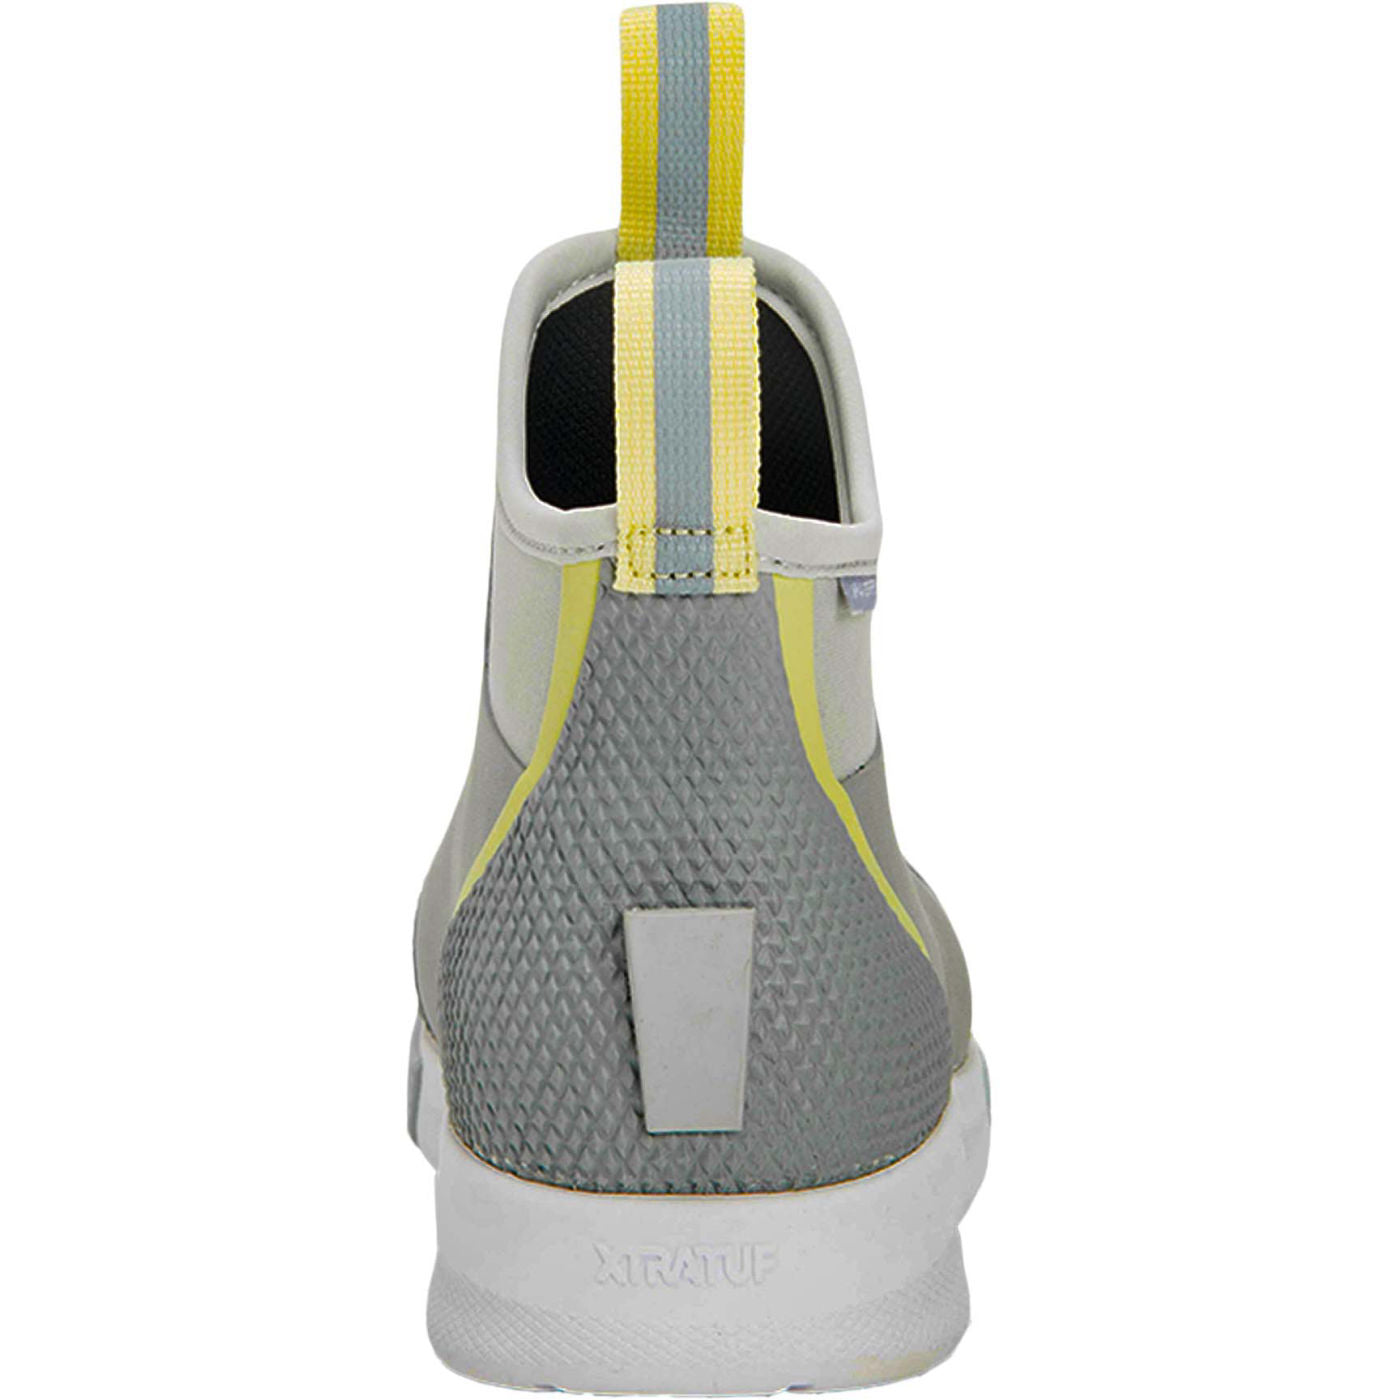 XTRATUF Ladies Ankle Deck Sport Gray & Yellow Boots ADSW108